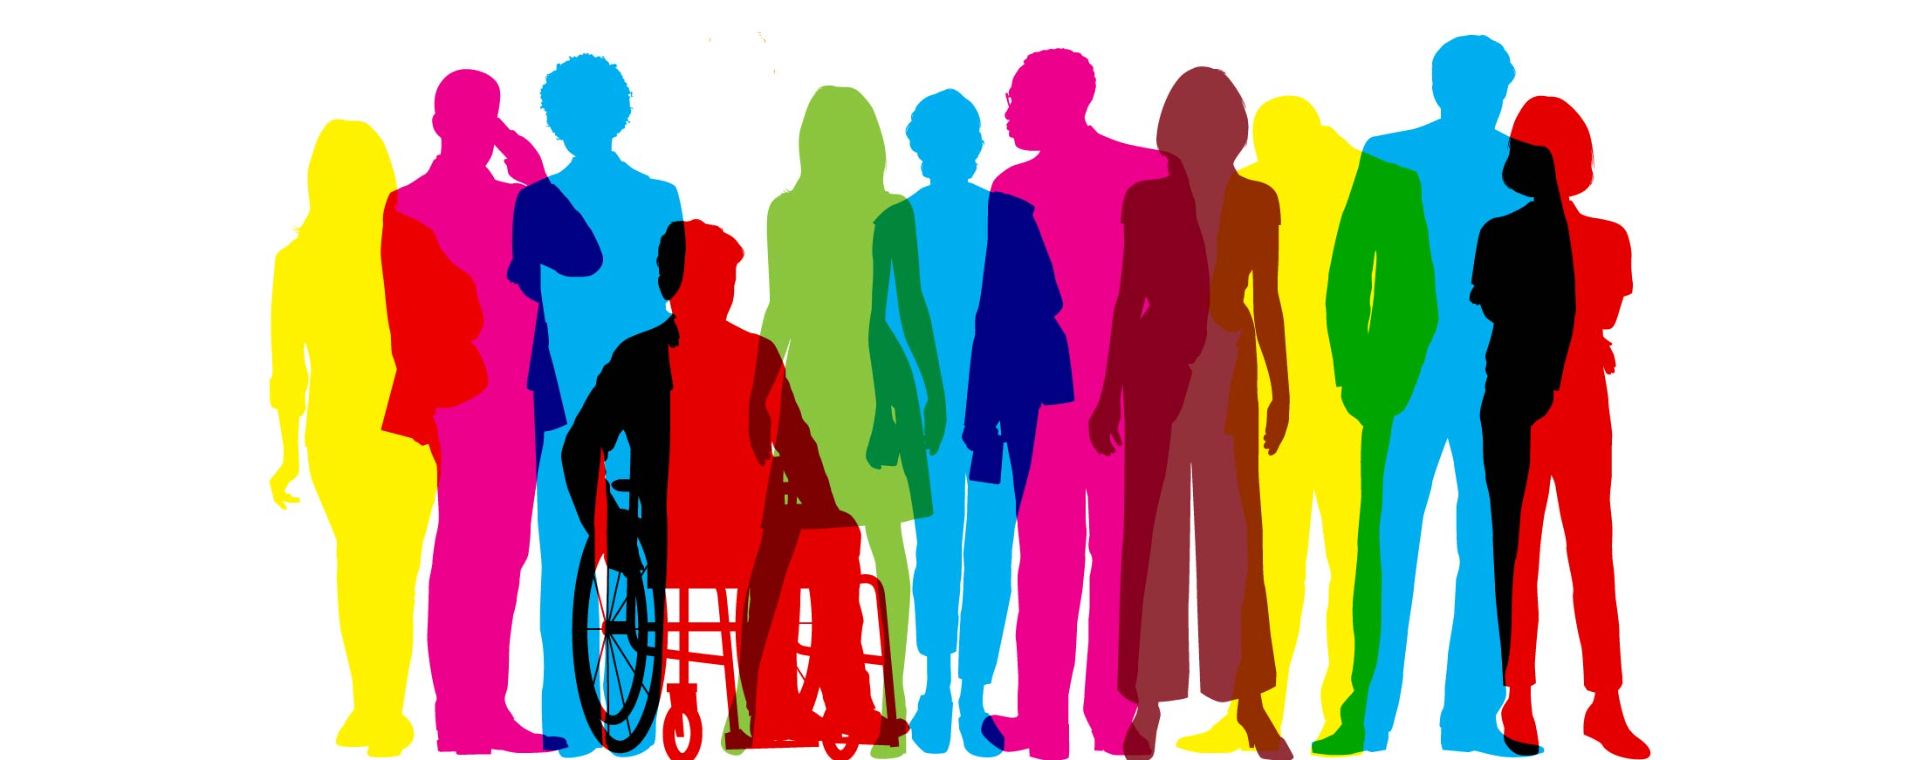 A rainbow silhouette of disabilities